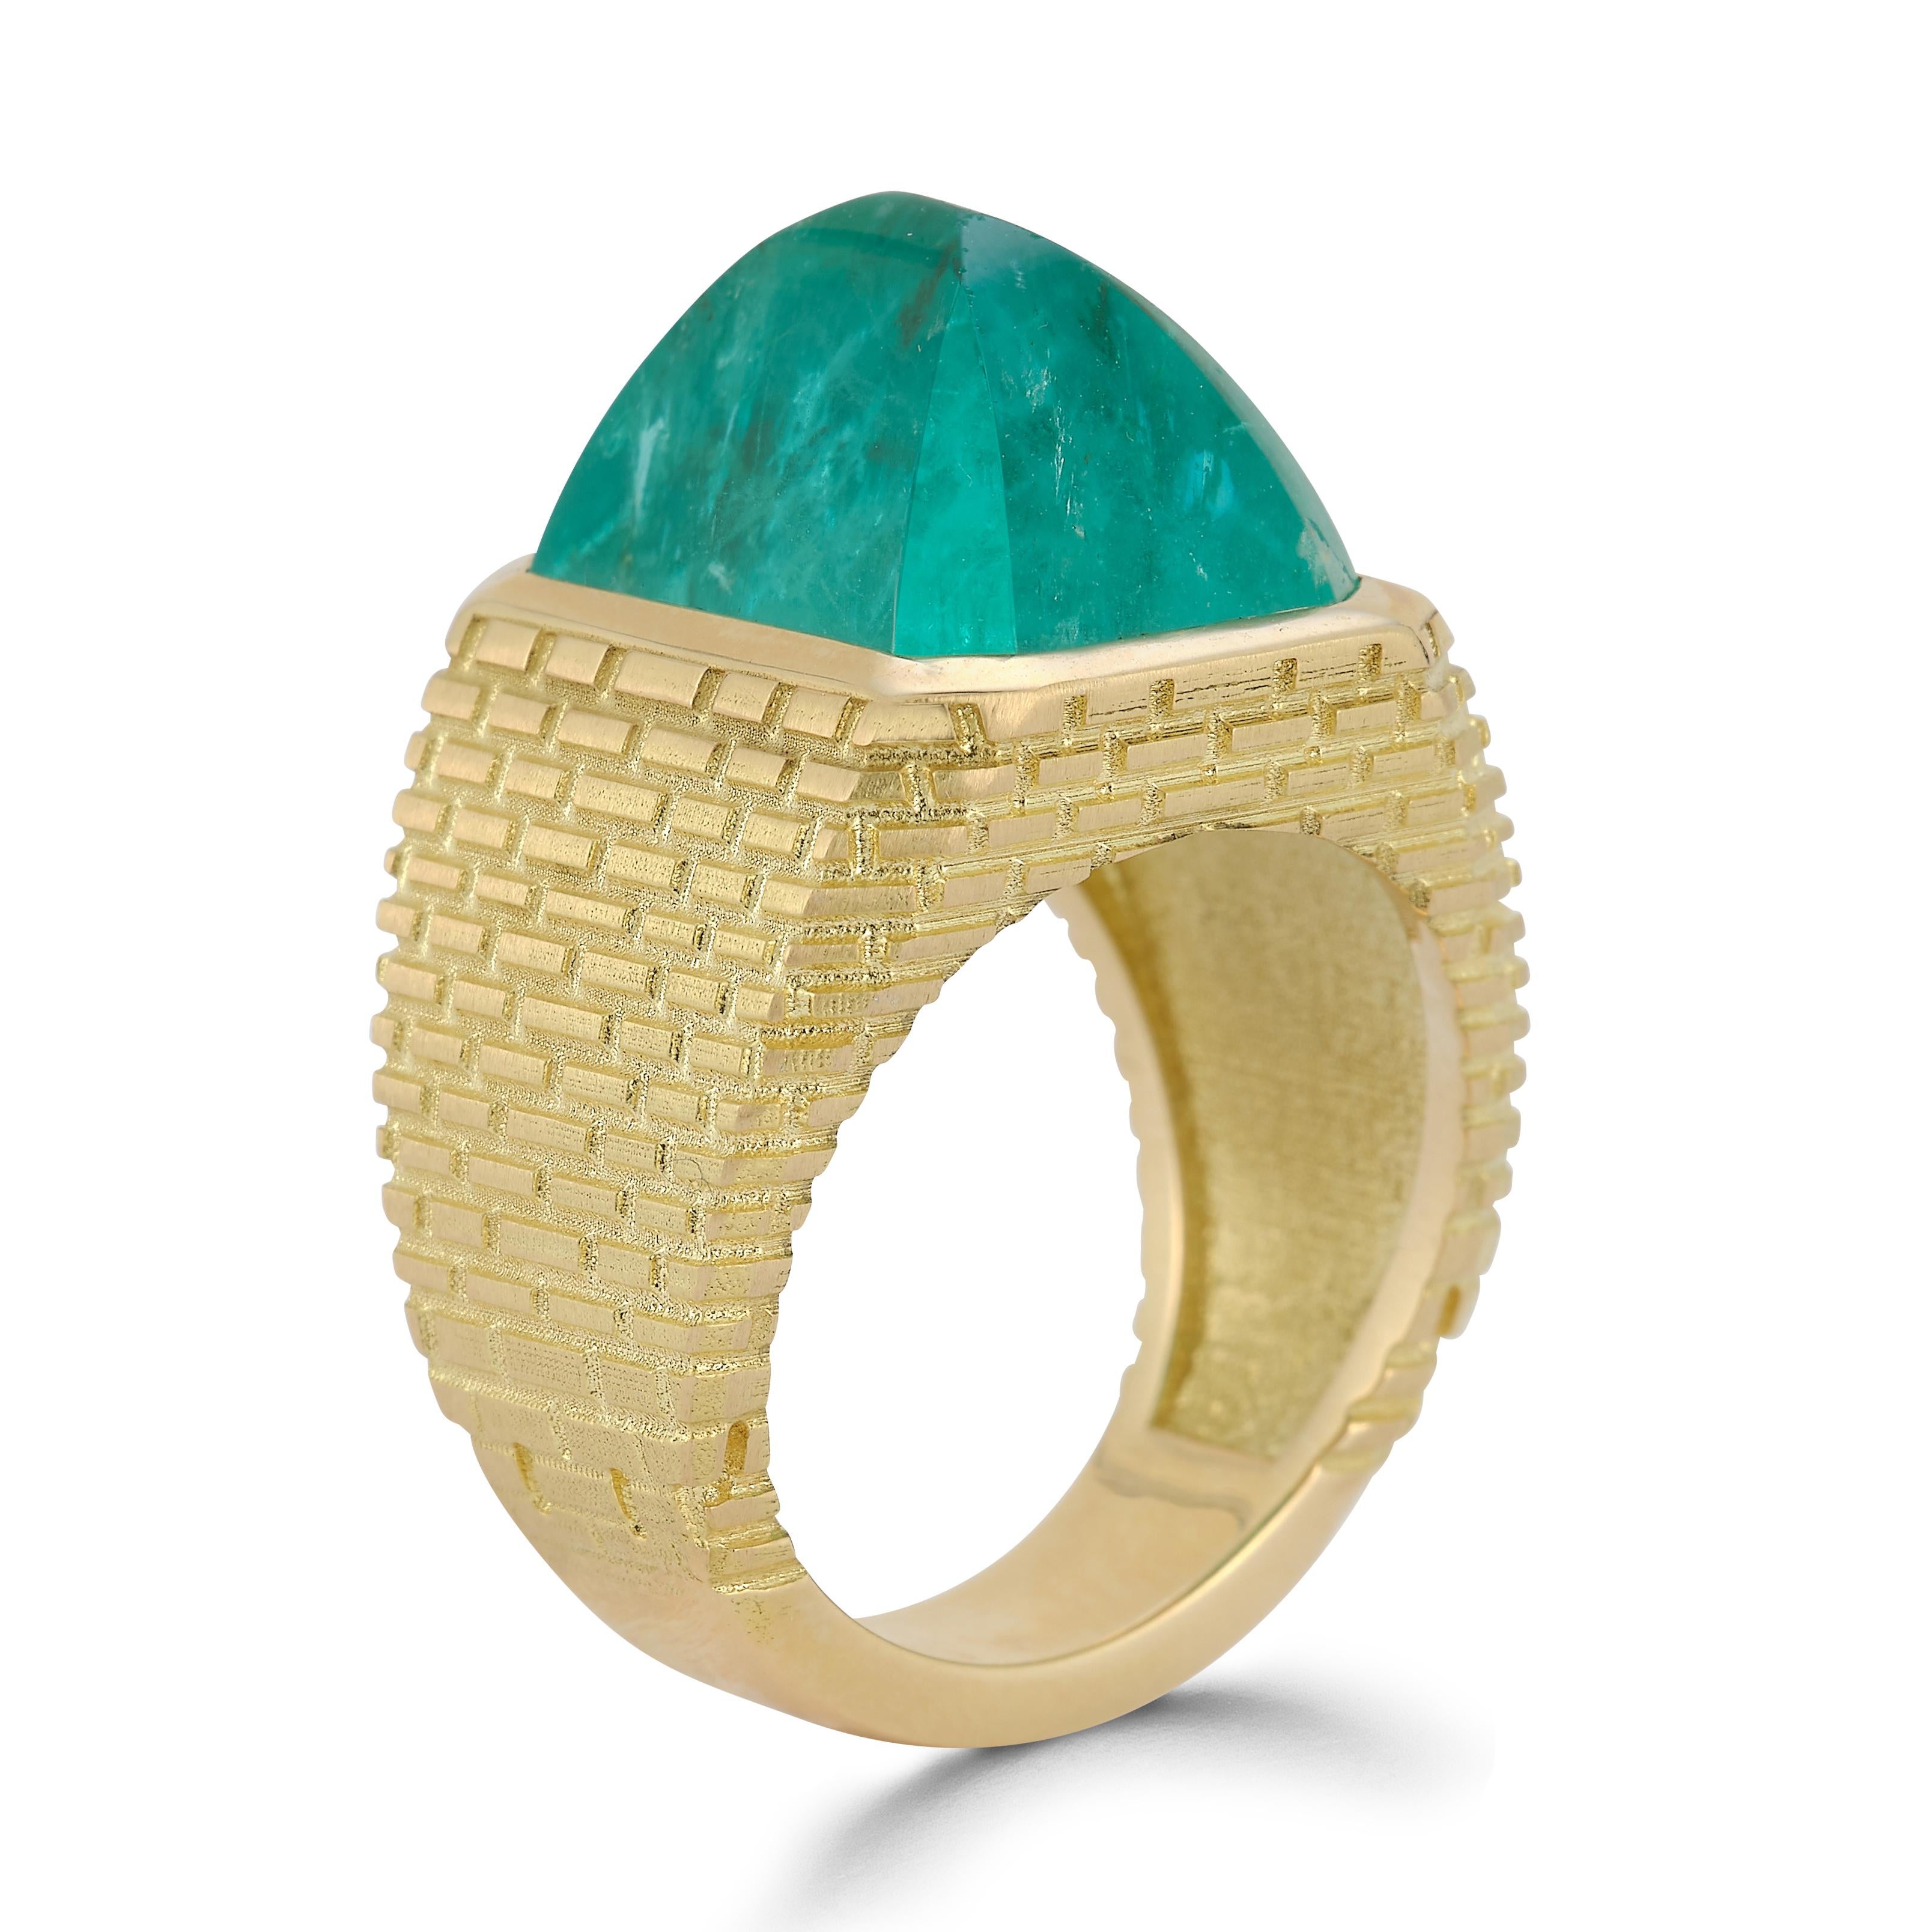 Men's Certified 15.13 Ct Cabochon Emerald Solitaire Pyramid Ring,

1 cabochon emerald set in a 18k yellow gold pyramid Egyptian Revival design setting. 

Ring Size: 6.5

Resizable free of charge 

Accompanied with AGL certificate 

